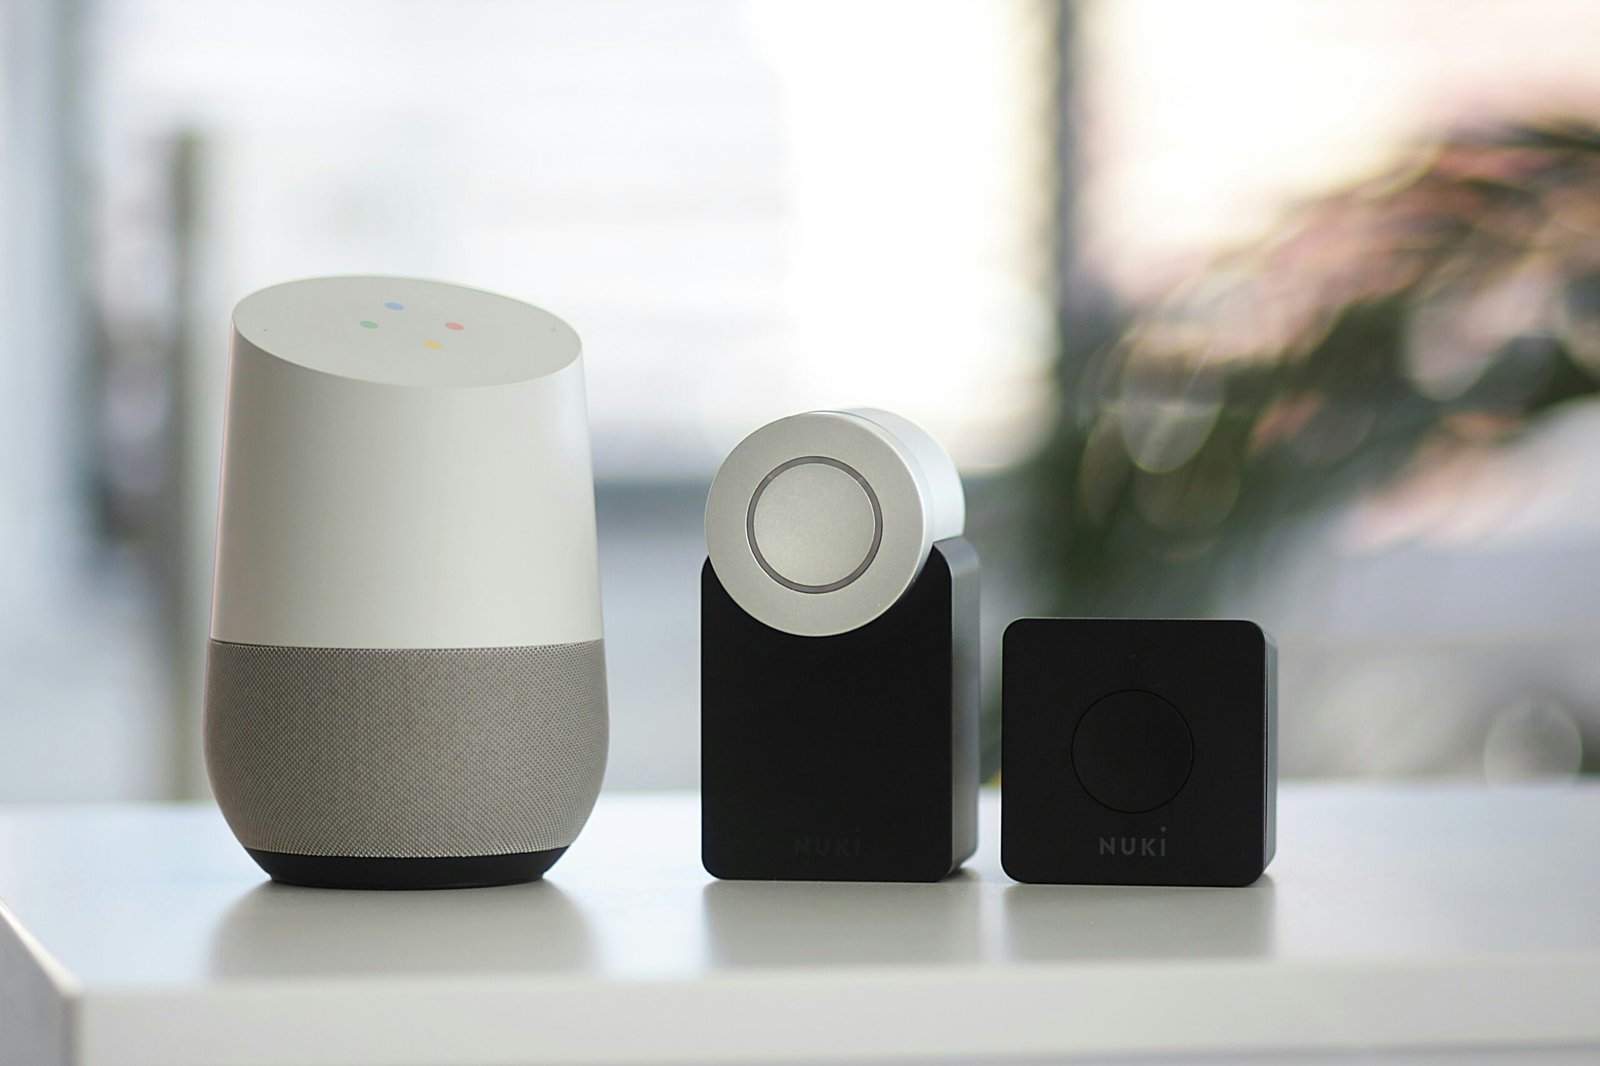 An image featuring several Google Home Mini devices, compact smart speakers that enable voice-controlled assistance and seamless integration with smart home technology.